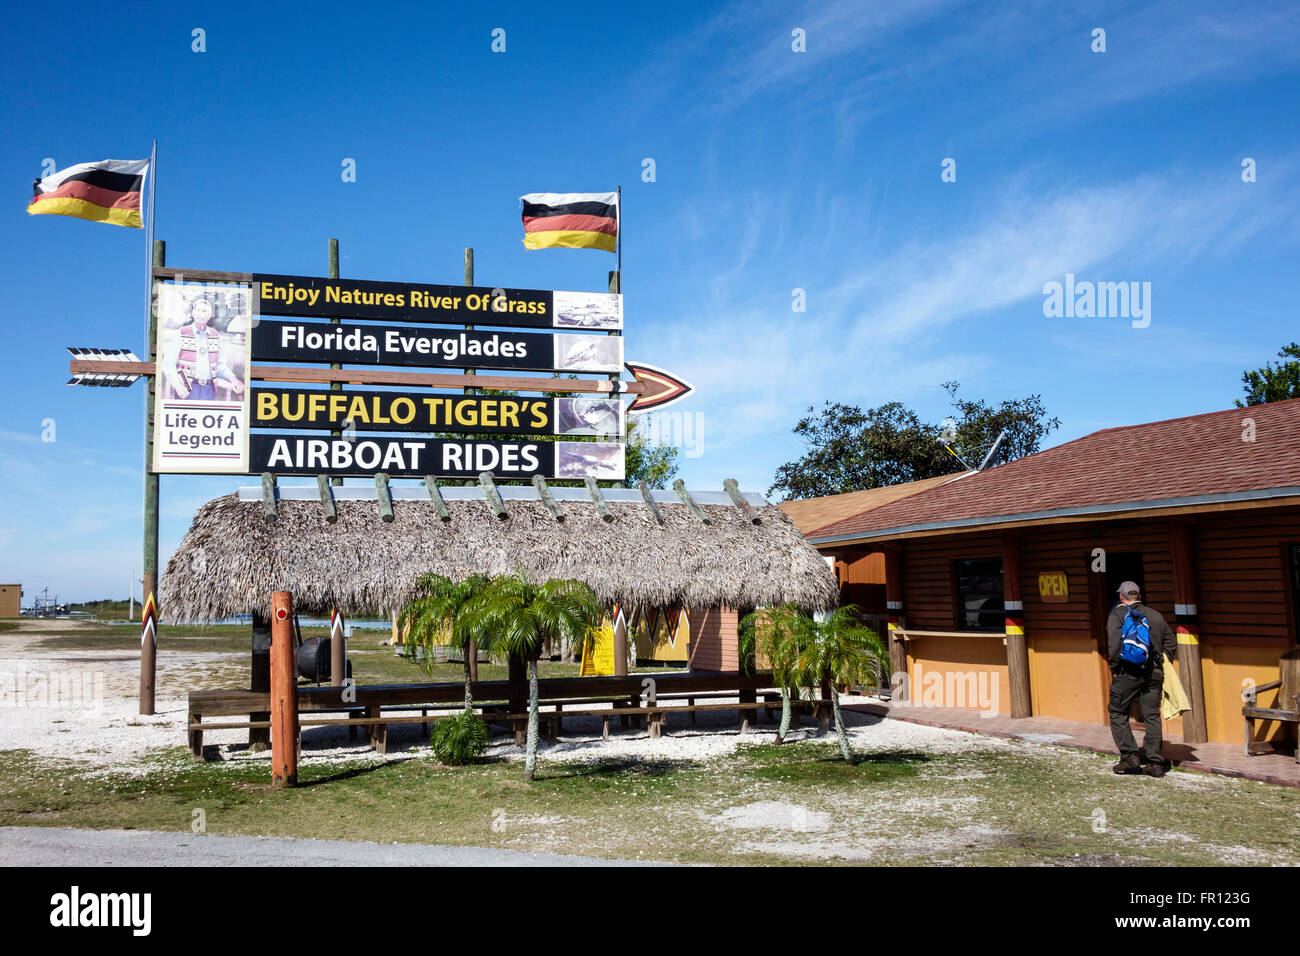 Florida Everglades, Tamiami Trail, Miccosukee Seminole Tribe Reservation, amérindiens autochtones, panneau, Buffalo Tiger's Airboat Rides, fl Banque D'Images